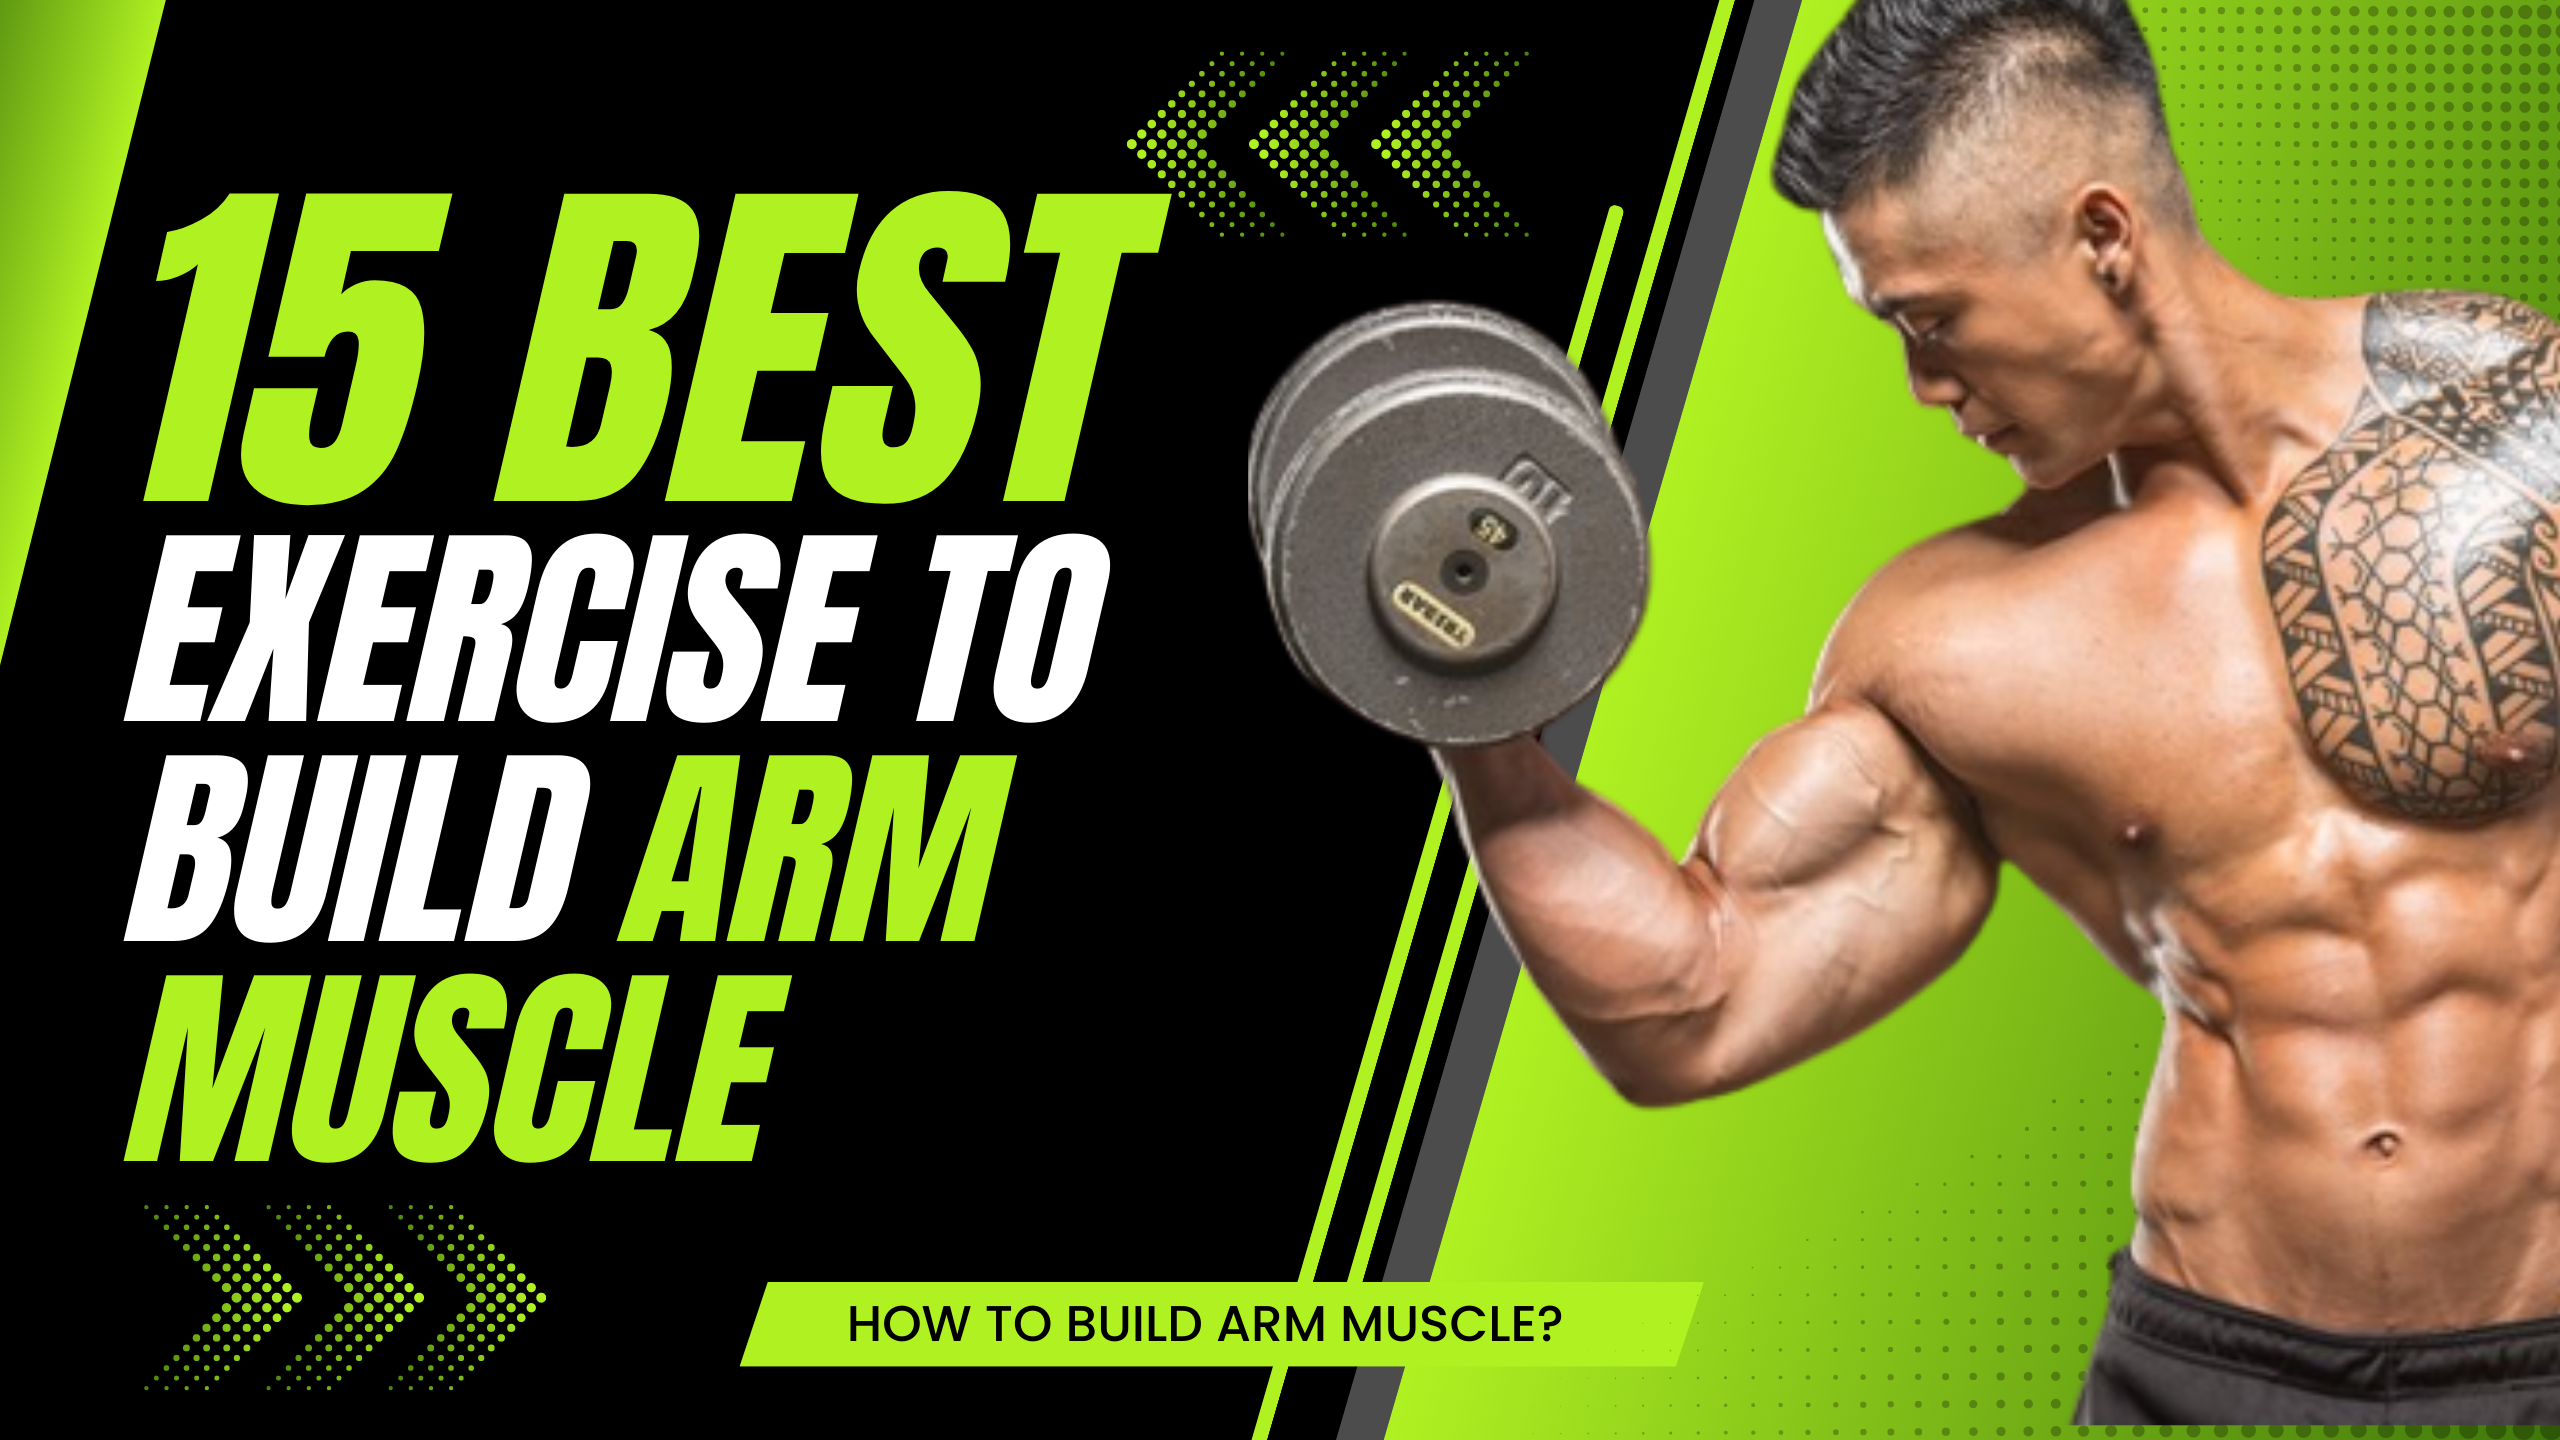 How To Build Muscle In The Arm? 15 Best Exercises To Build Muscle in The Arm